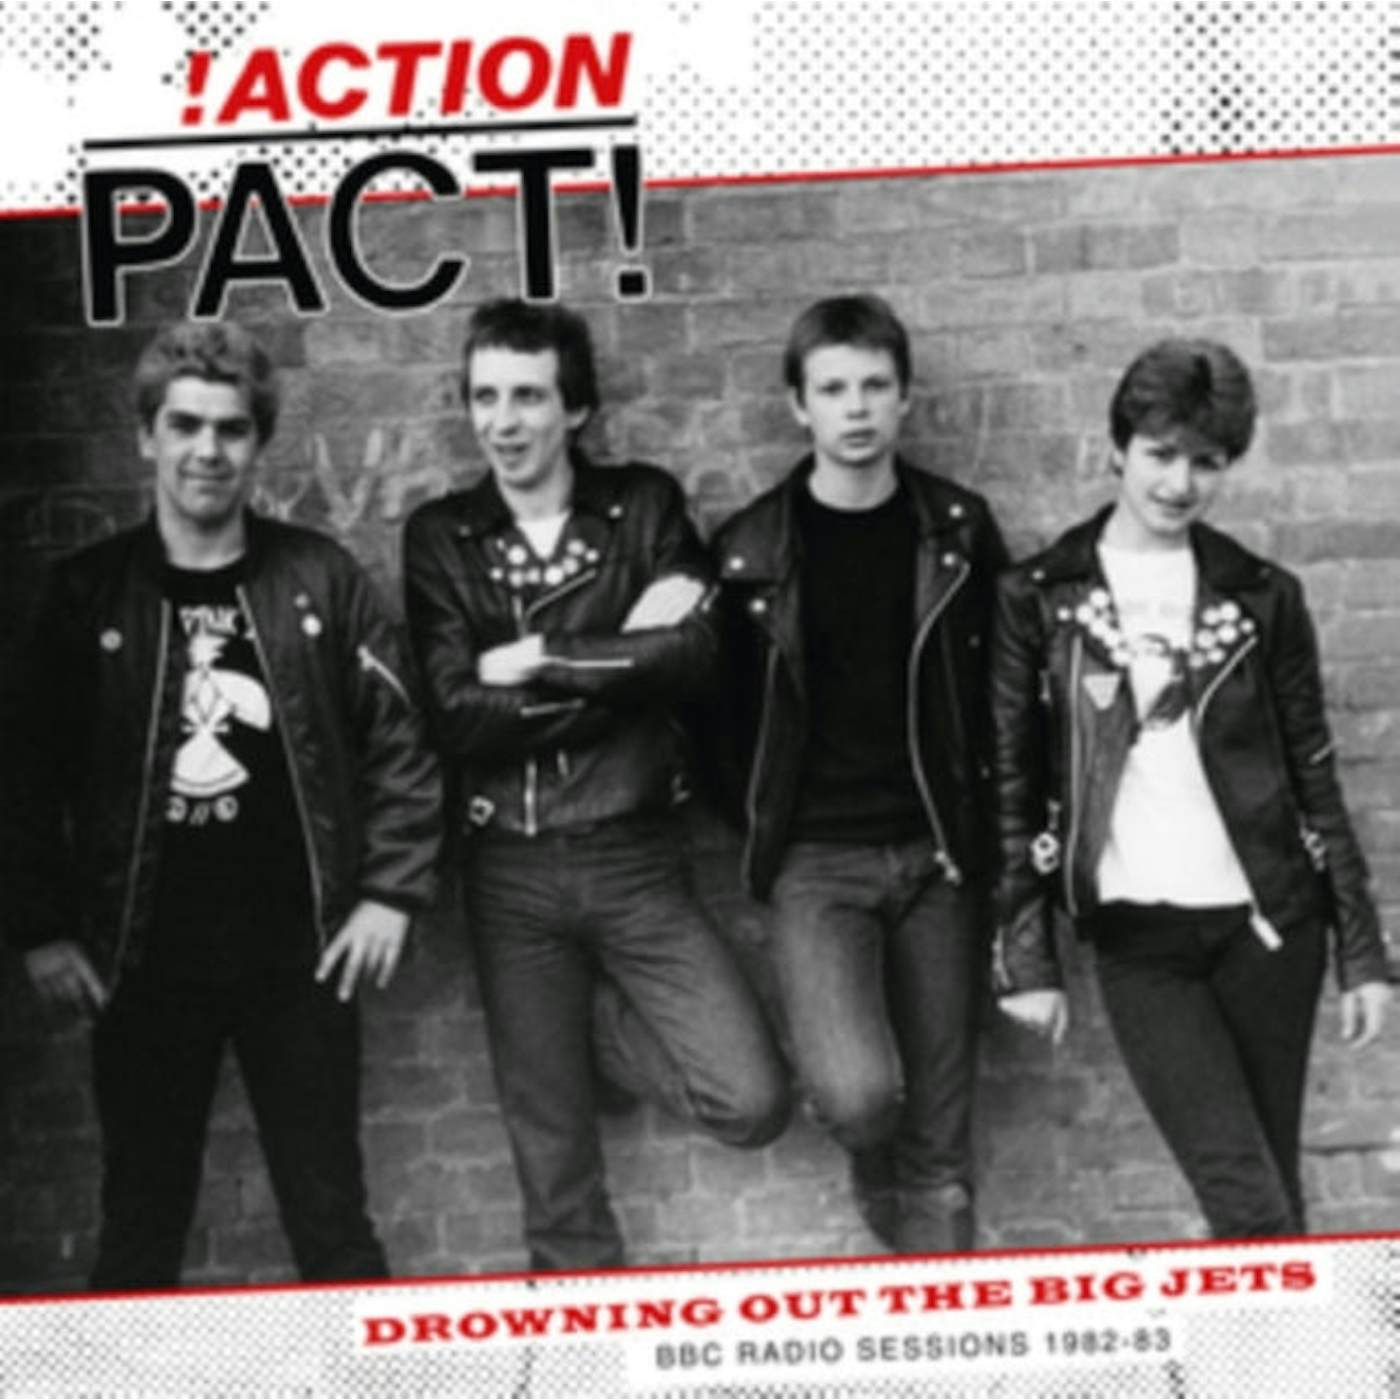 Action Pact LP - Drowning Out the Big Jets: BBC Radio Sessions 1982-83 (Vinyl)